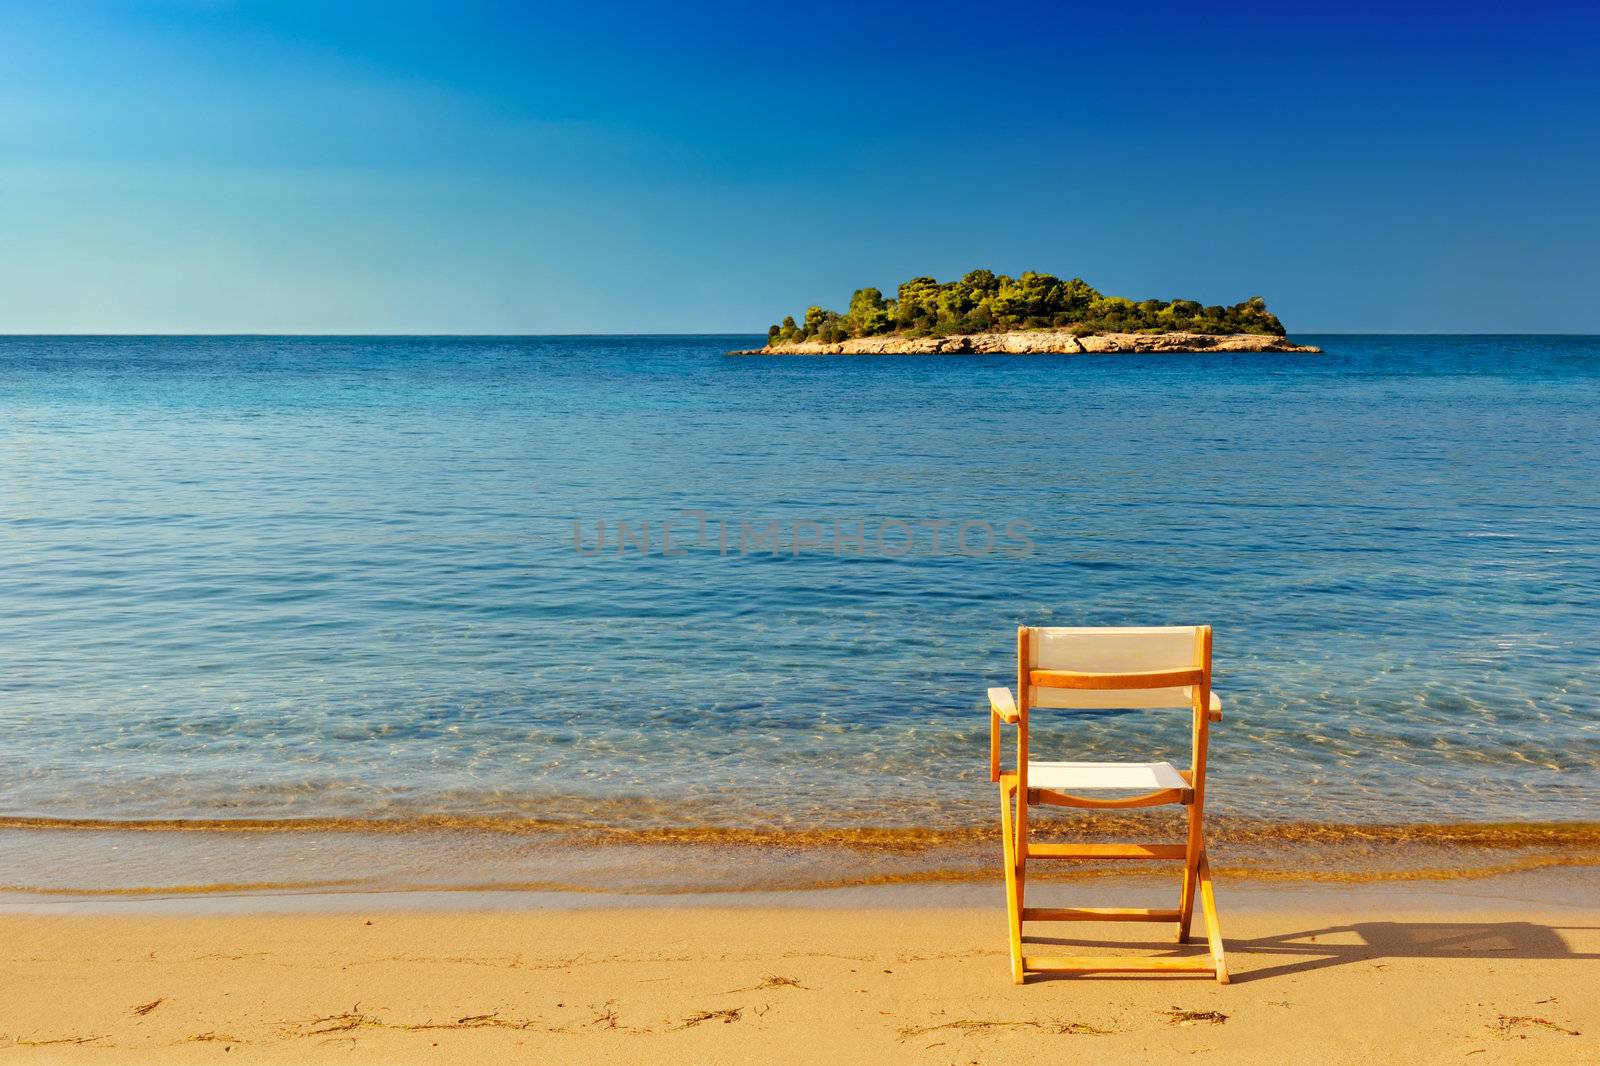 A chair on a sandy beach offering a place to enjoy the view and serenity of the location